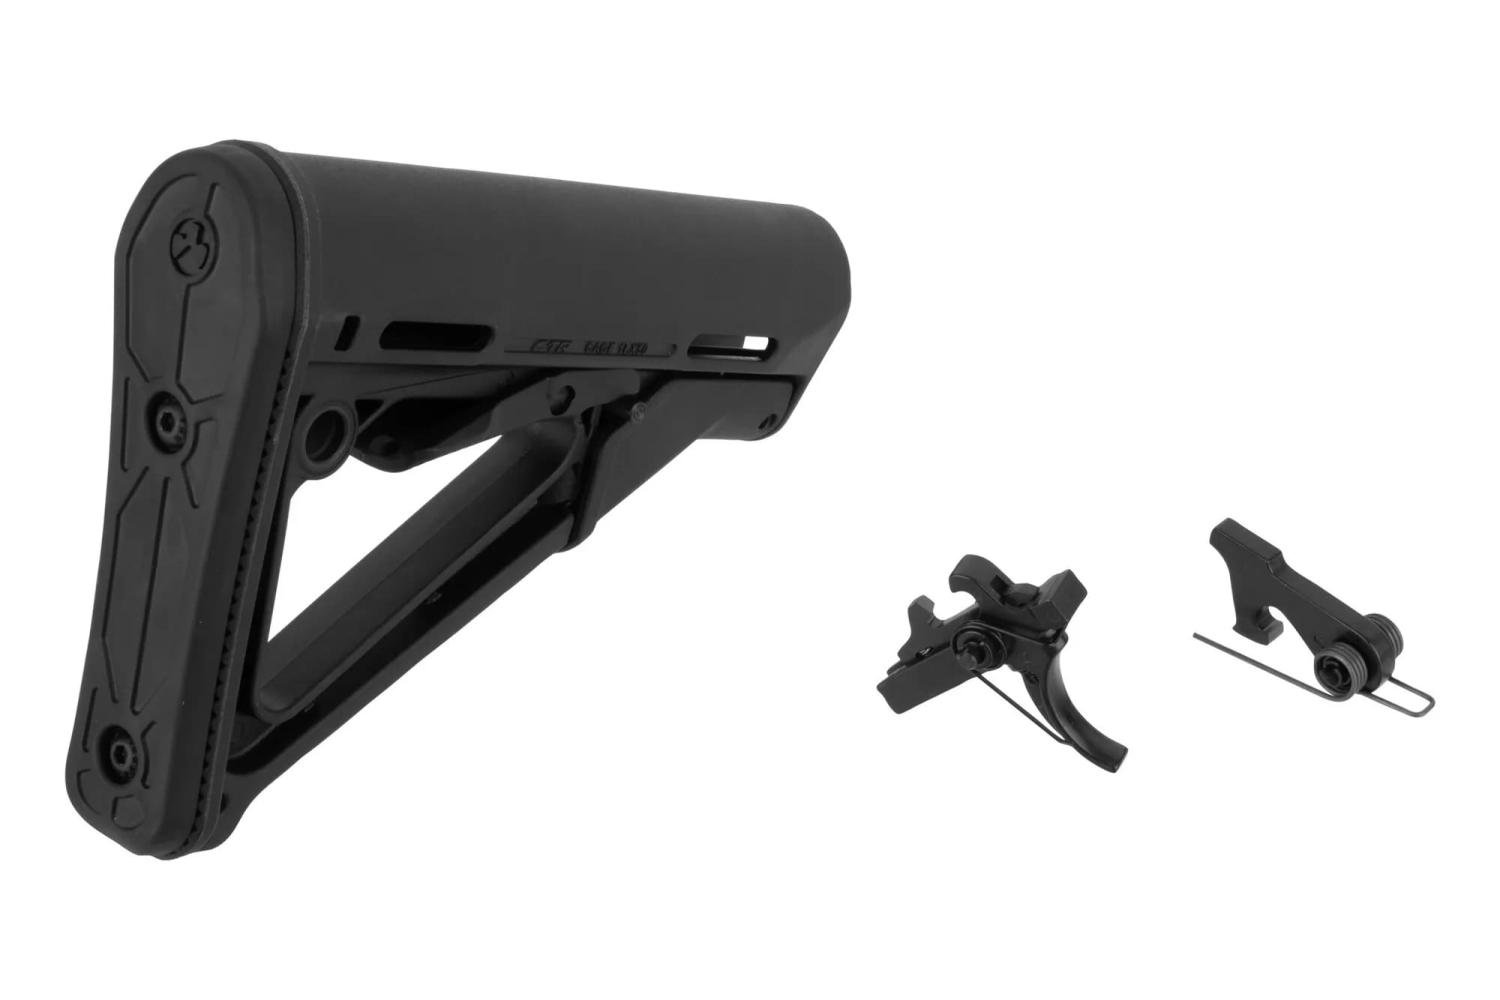 Geissele Automatics G2S Two Stage AR-15 Trigger with a Free Magpul CTR Mil-Spec Carbine Stock - Black - $165